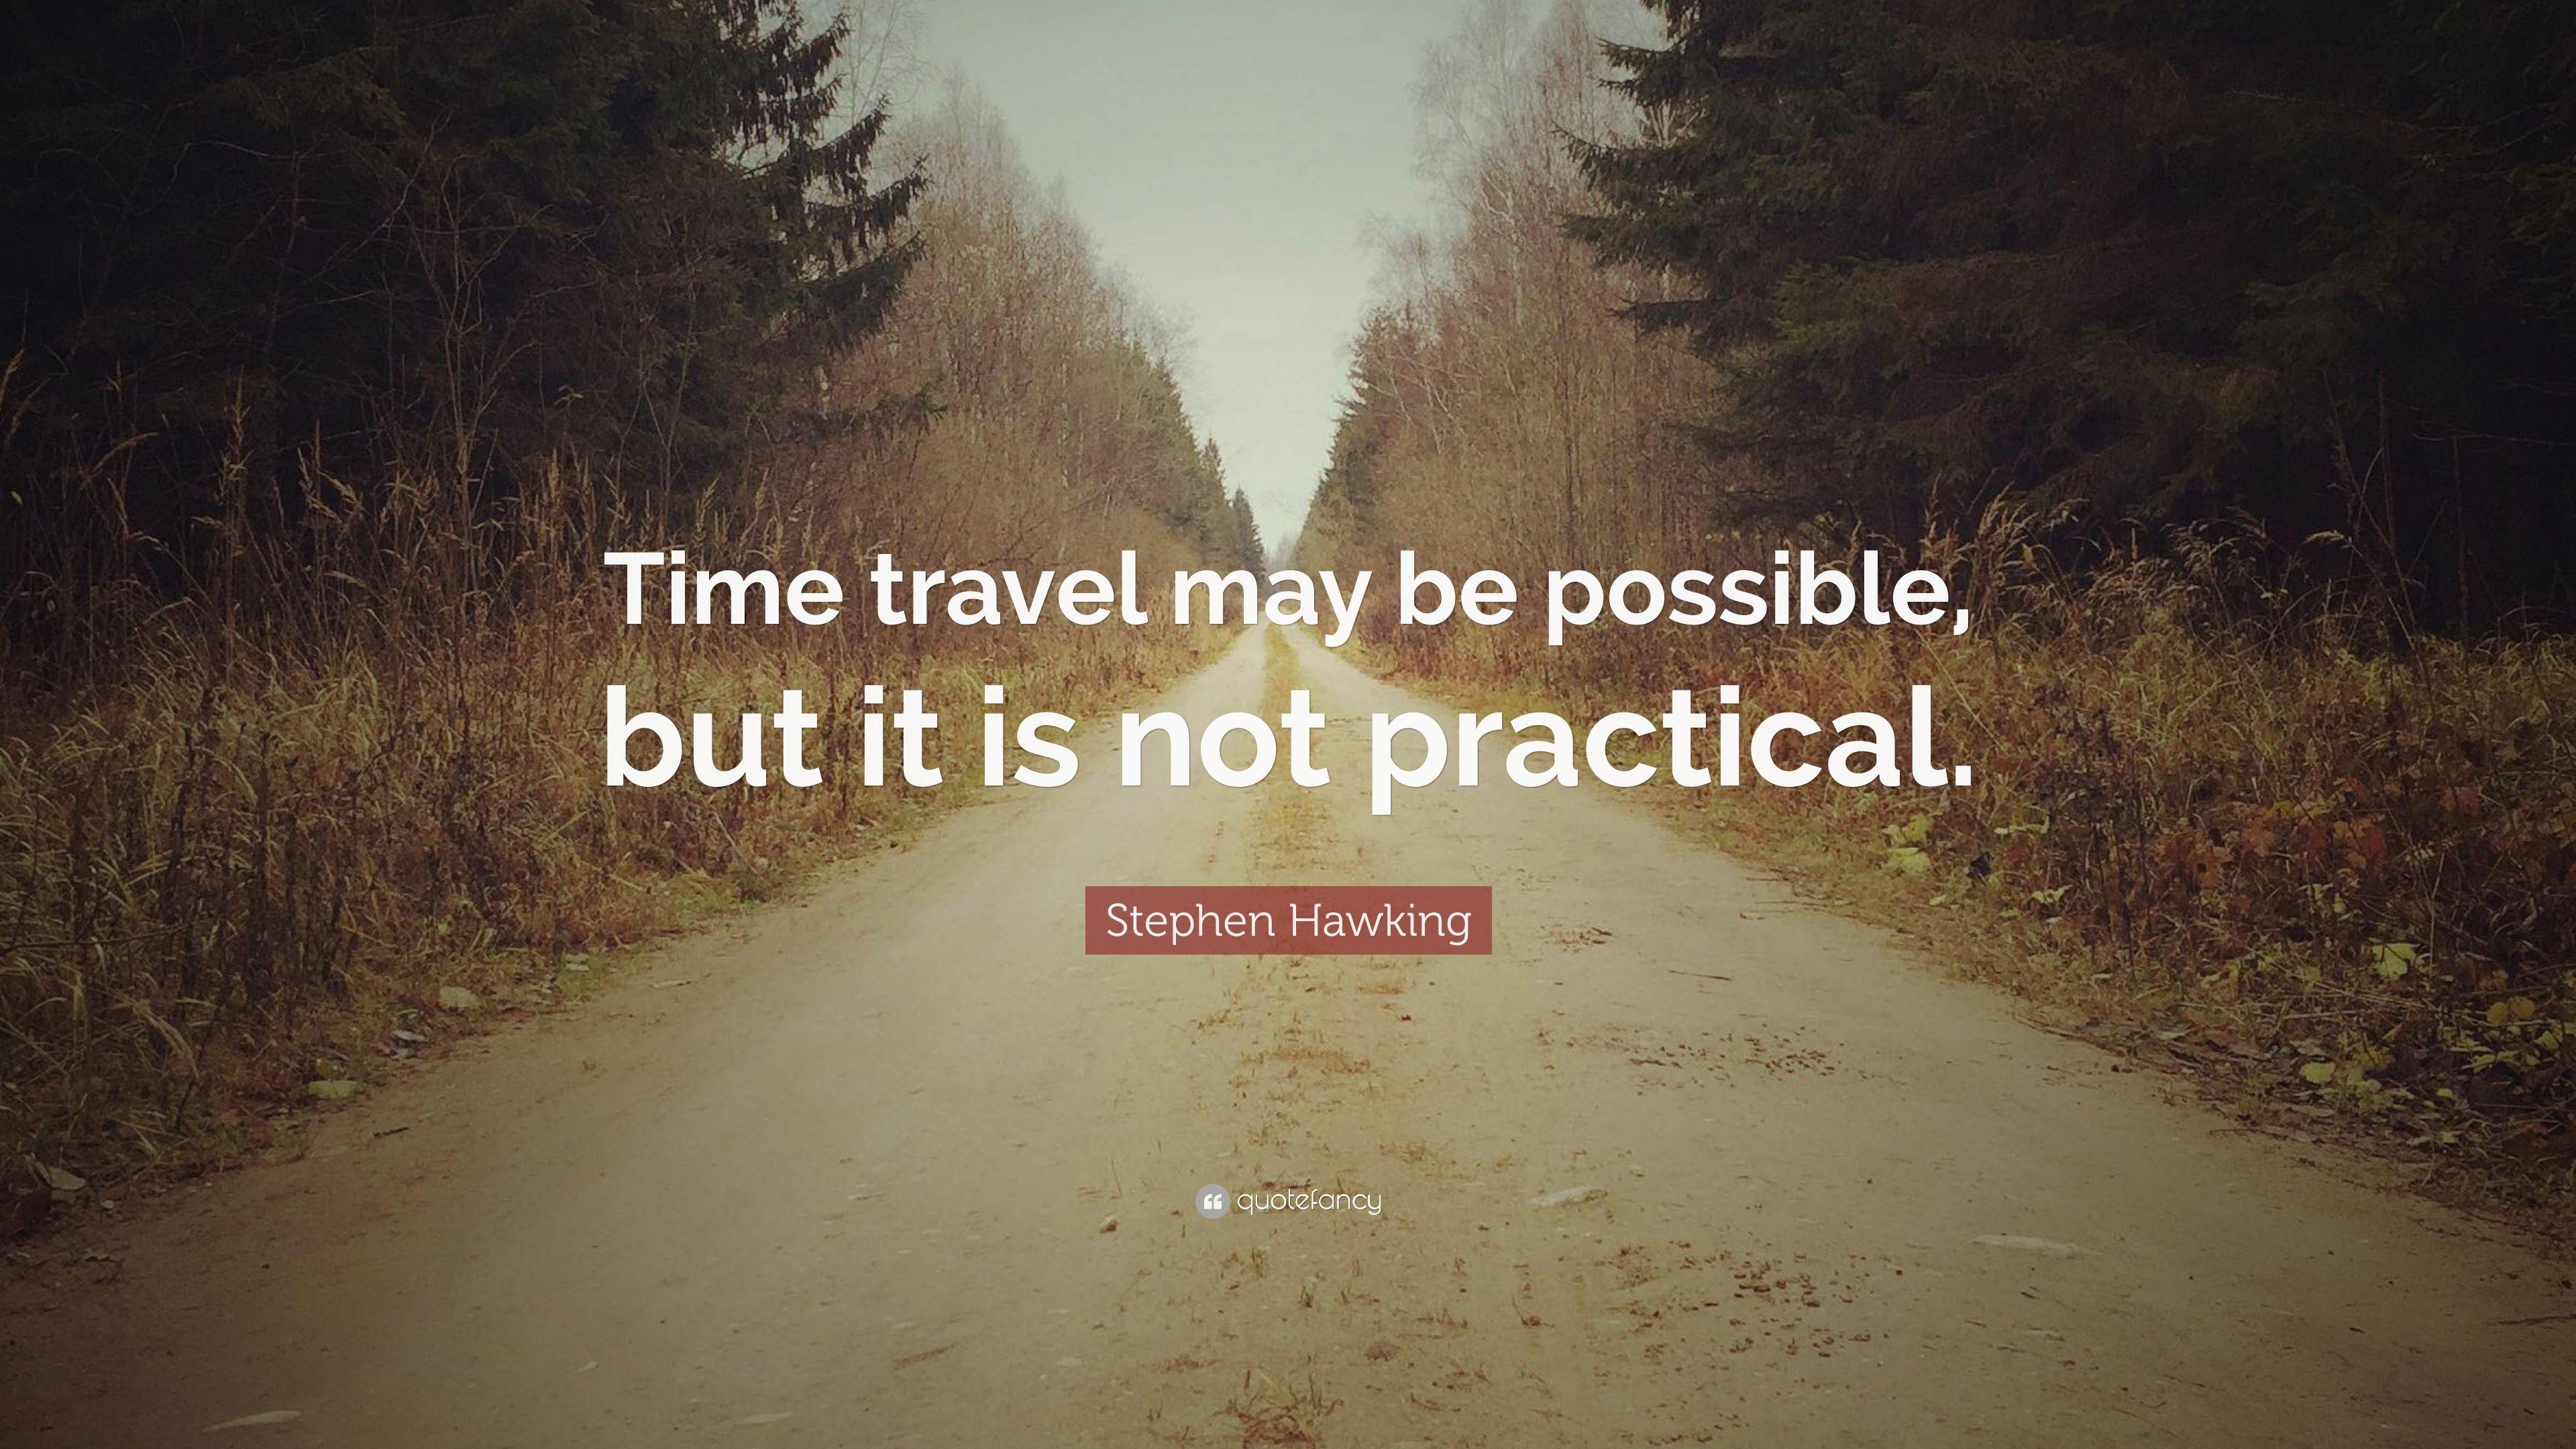 Stephen Hawking Quote: “Time travel may be possible, but it is not